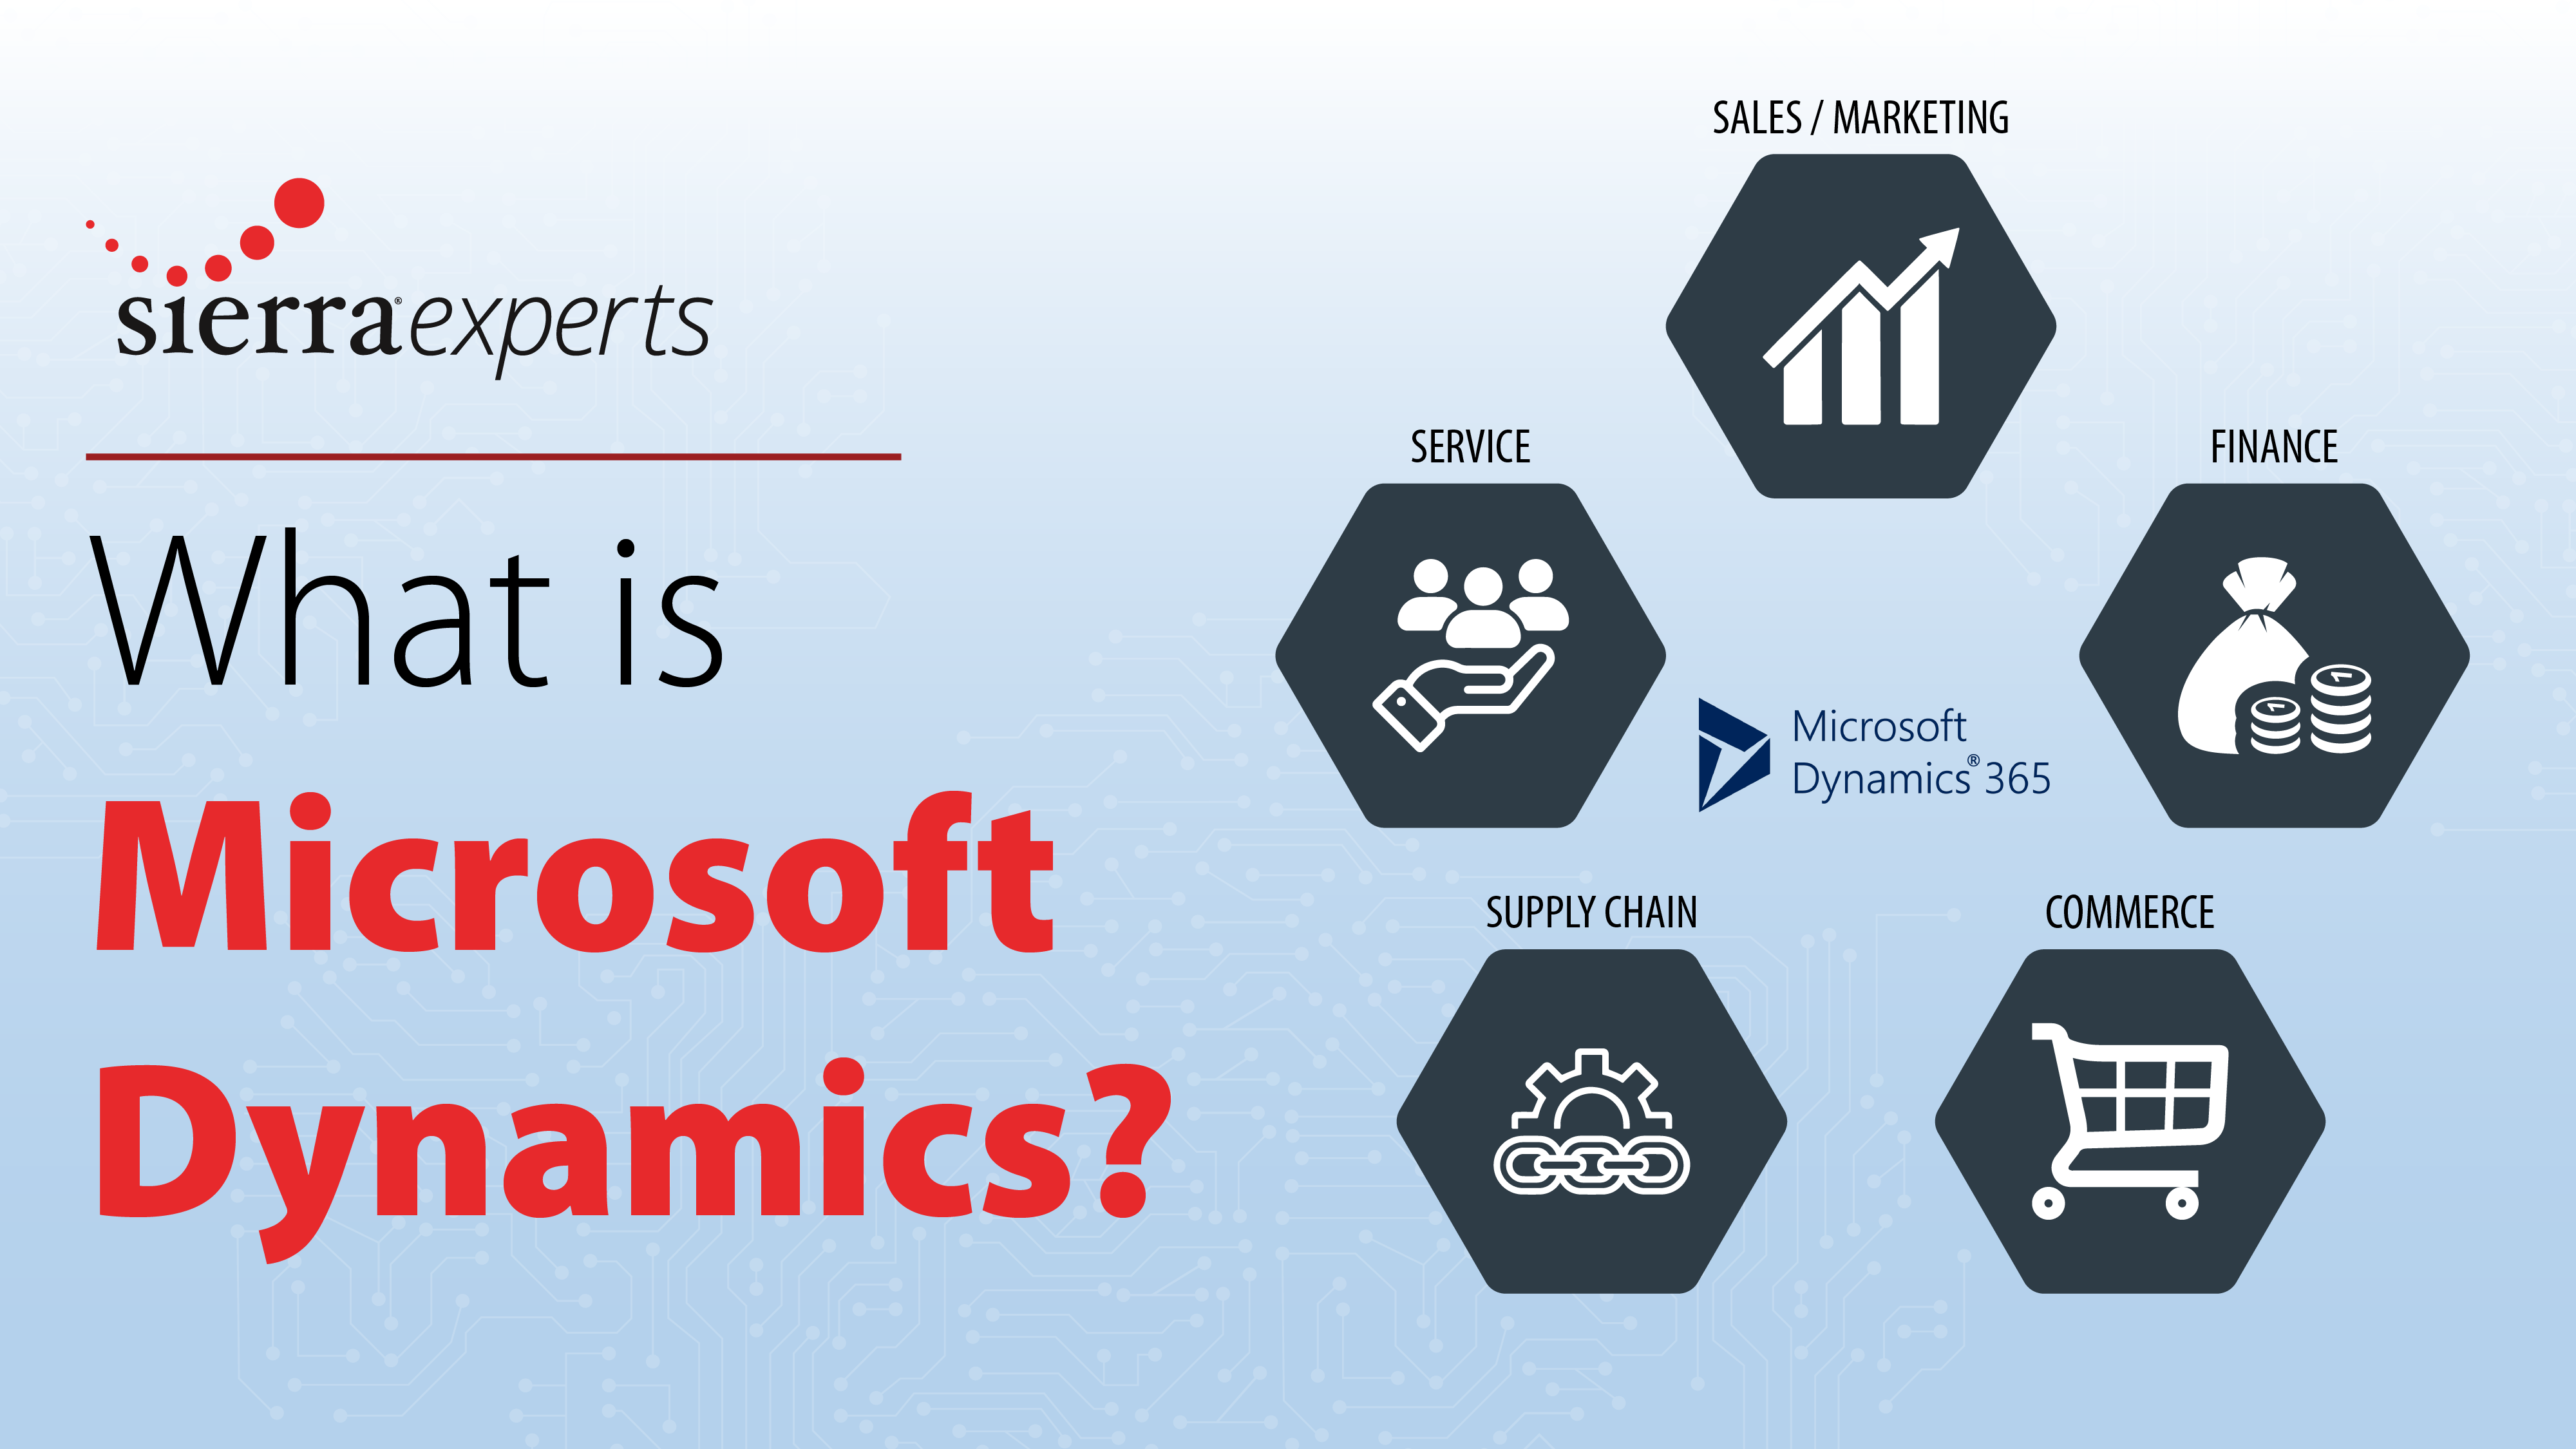 Diagram showing what Microsoft Dynamics is capable of: sales/marketing, finance, commerce, supply chain, and service